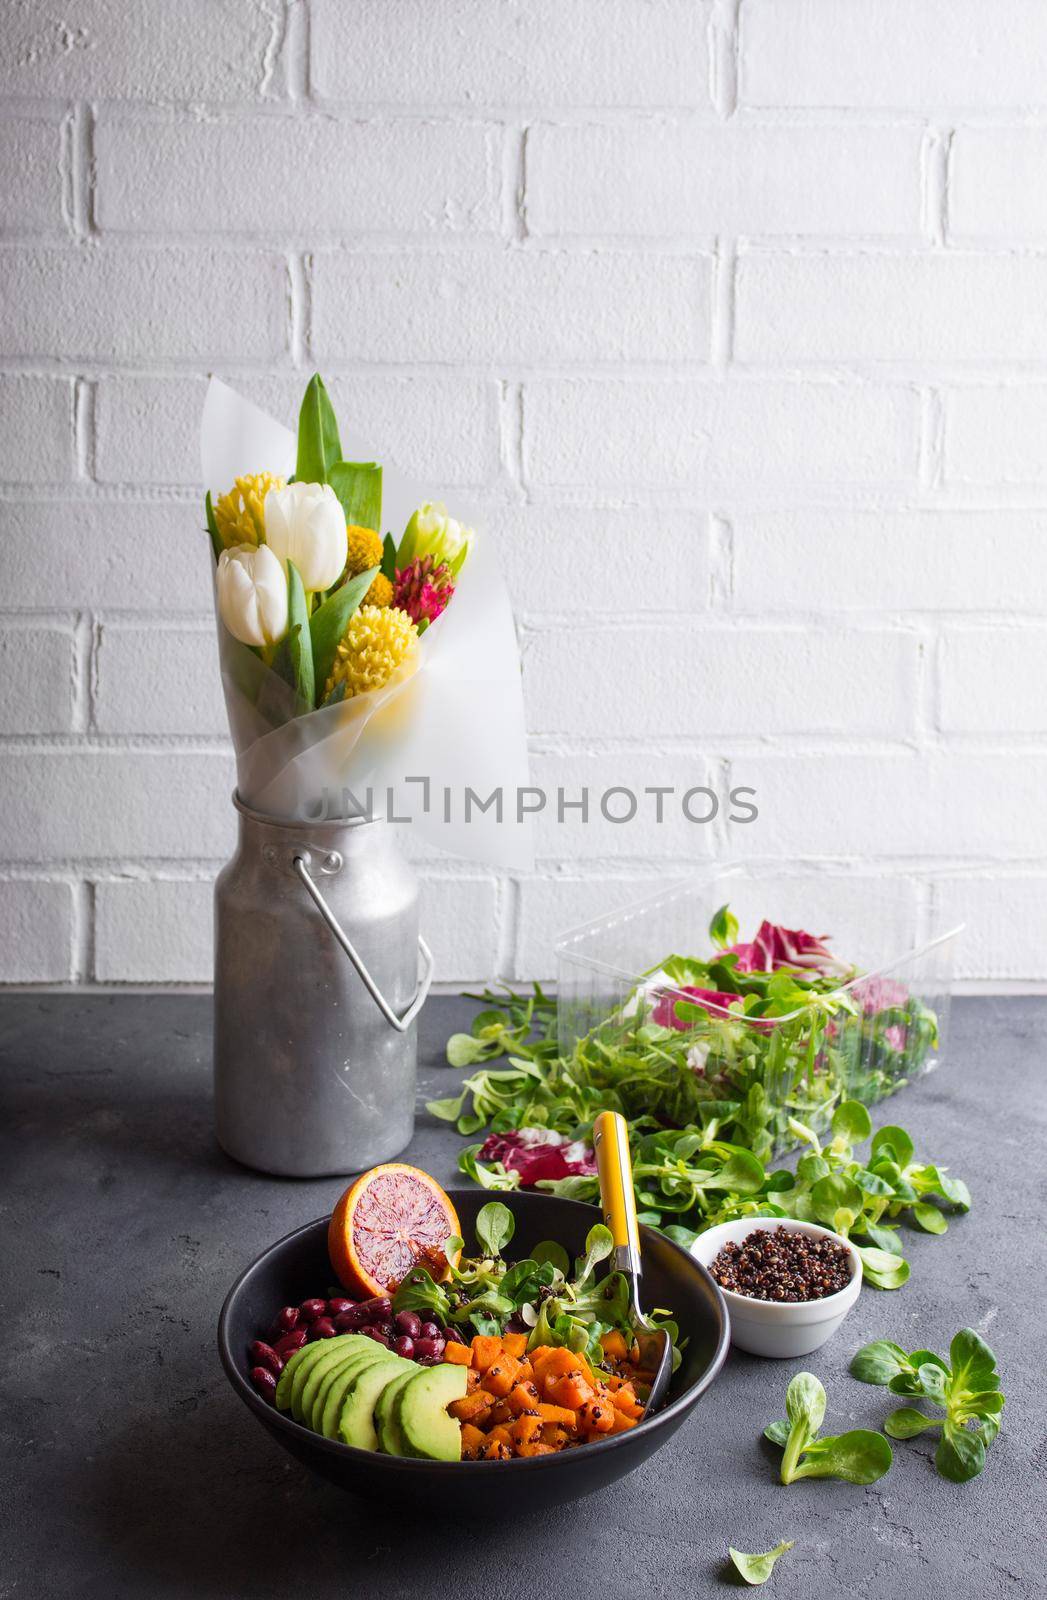 Table with fresh clean organic food. Quinoa vegetables salad bowl, salad leaves, flowers bouquet. Superfood or detox eating concept. Spring setting. Vegan/vegetarian food. Make salad. Space for text